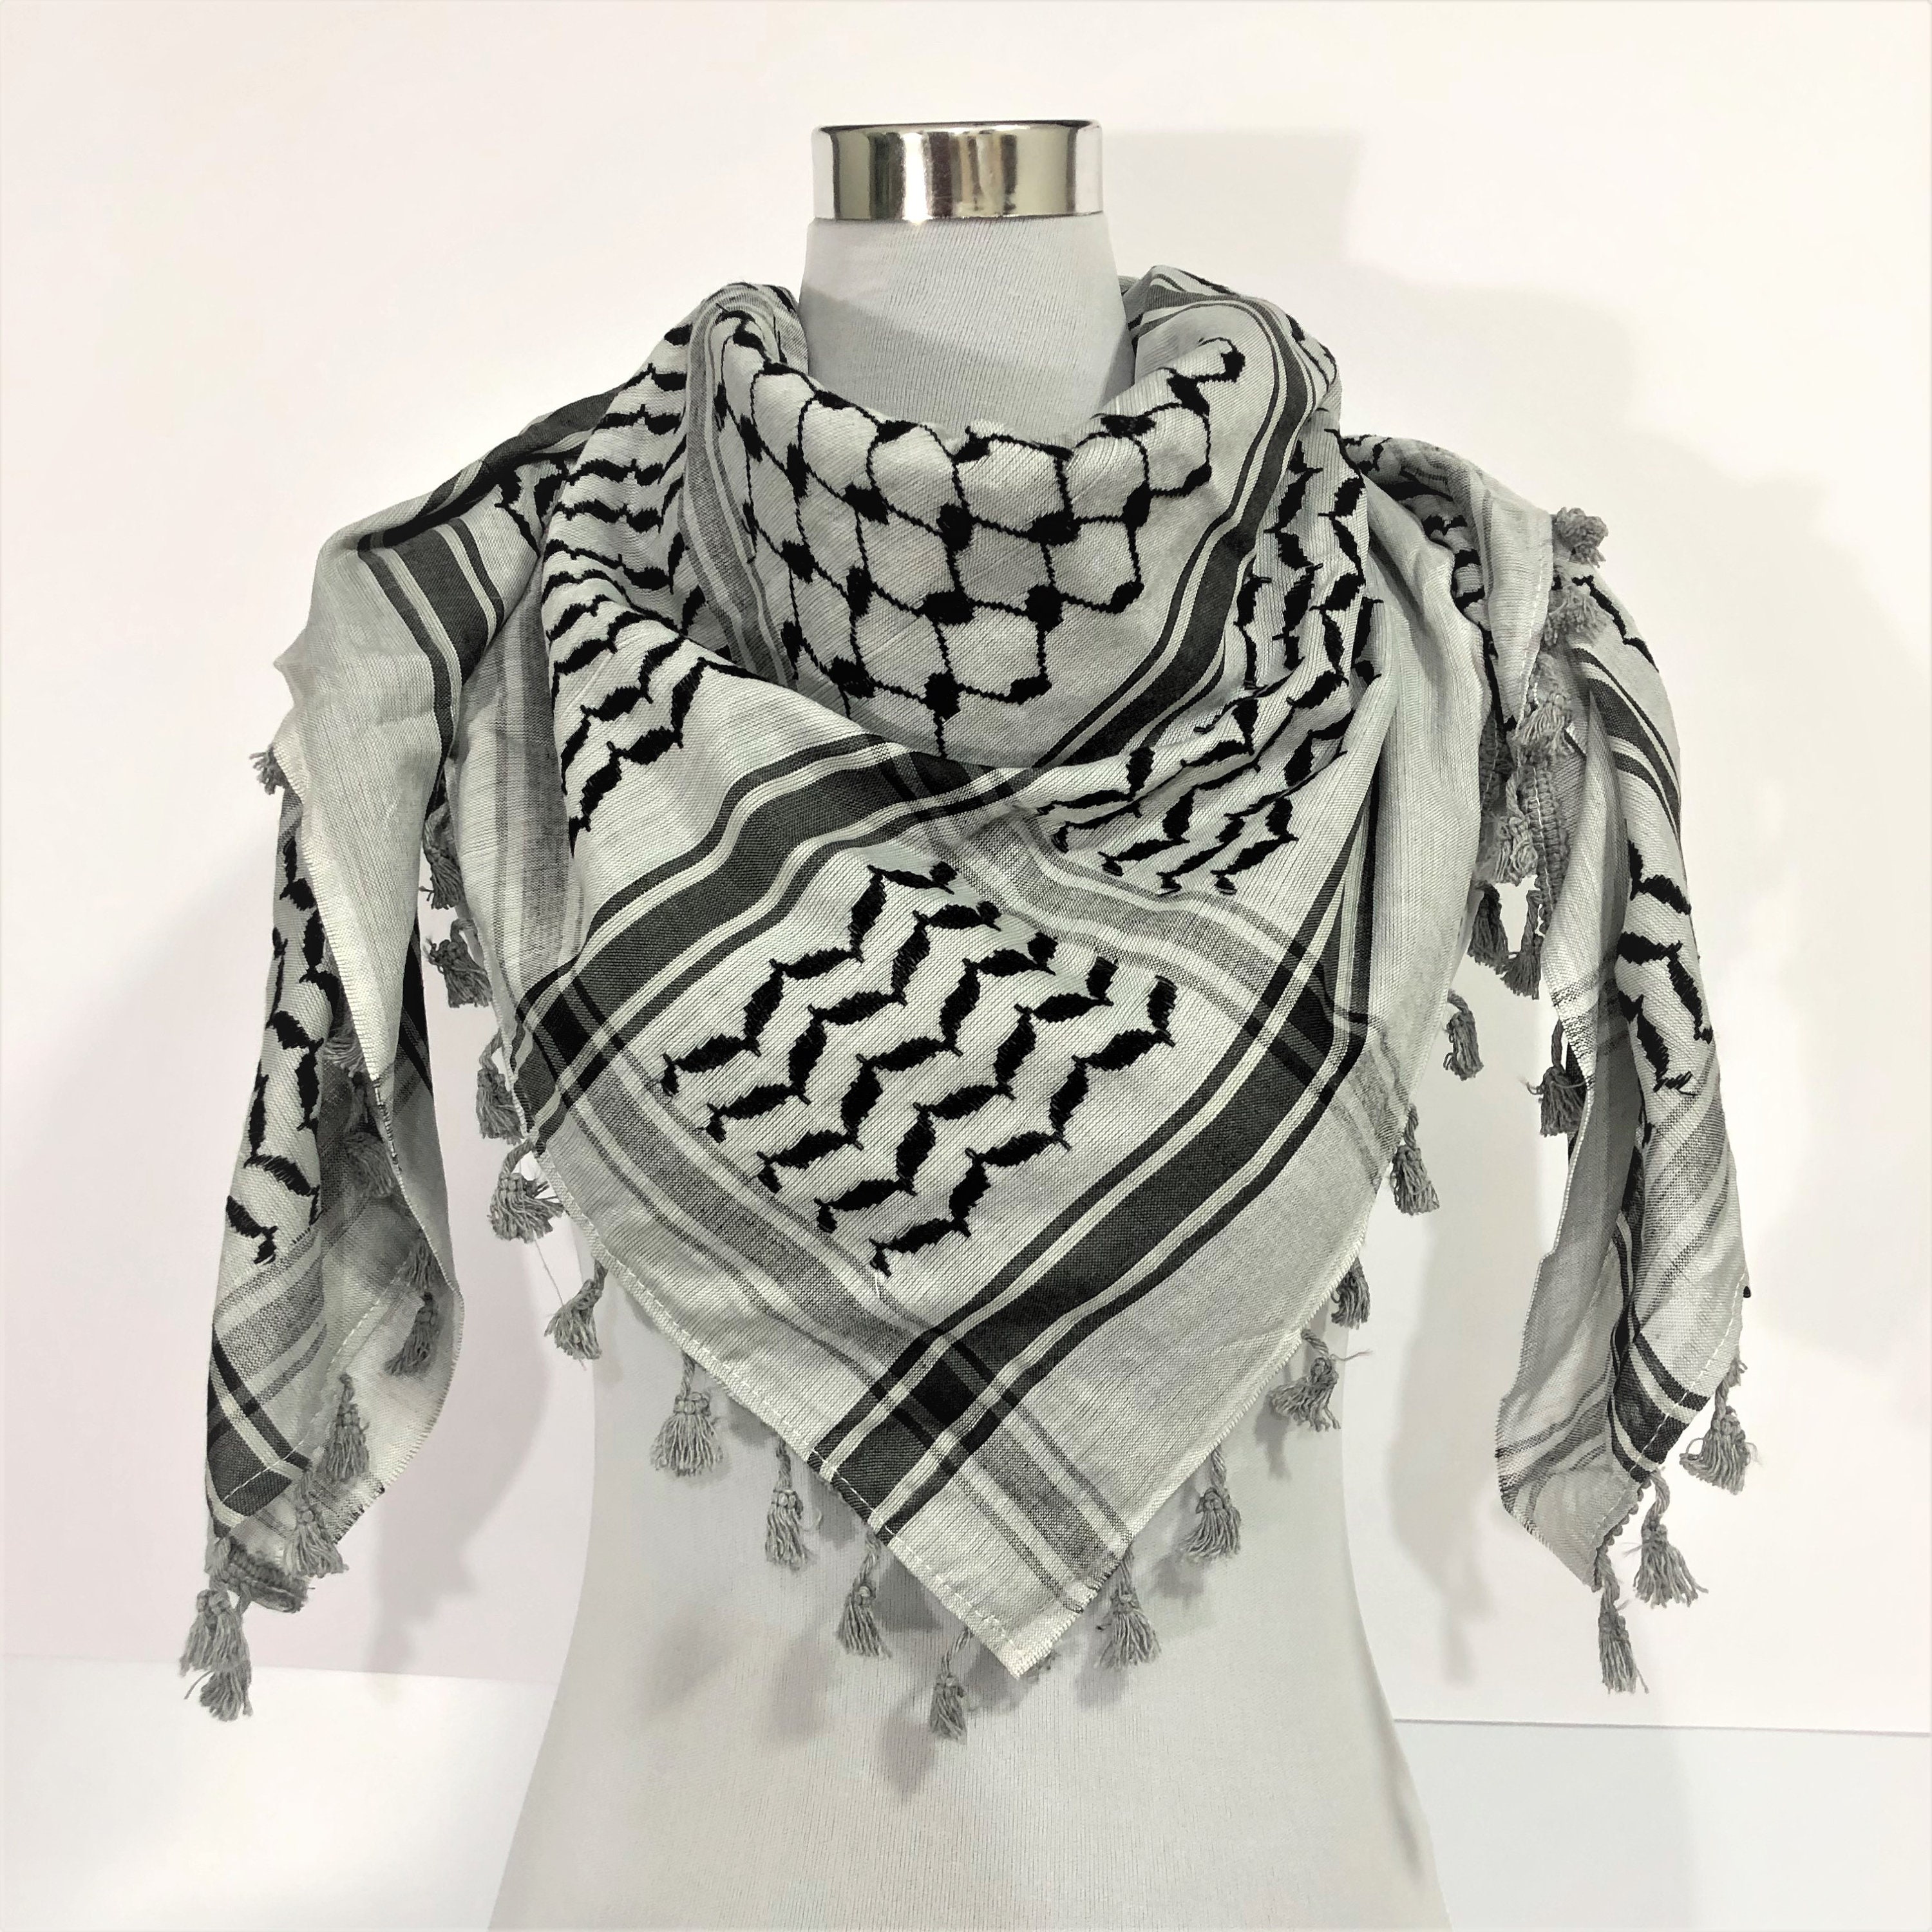 Shemagh Keffiyeh Palestinian Neck Scarf WOVEN not printed design 12 colours 